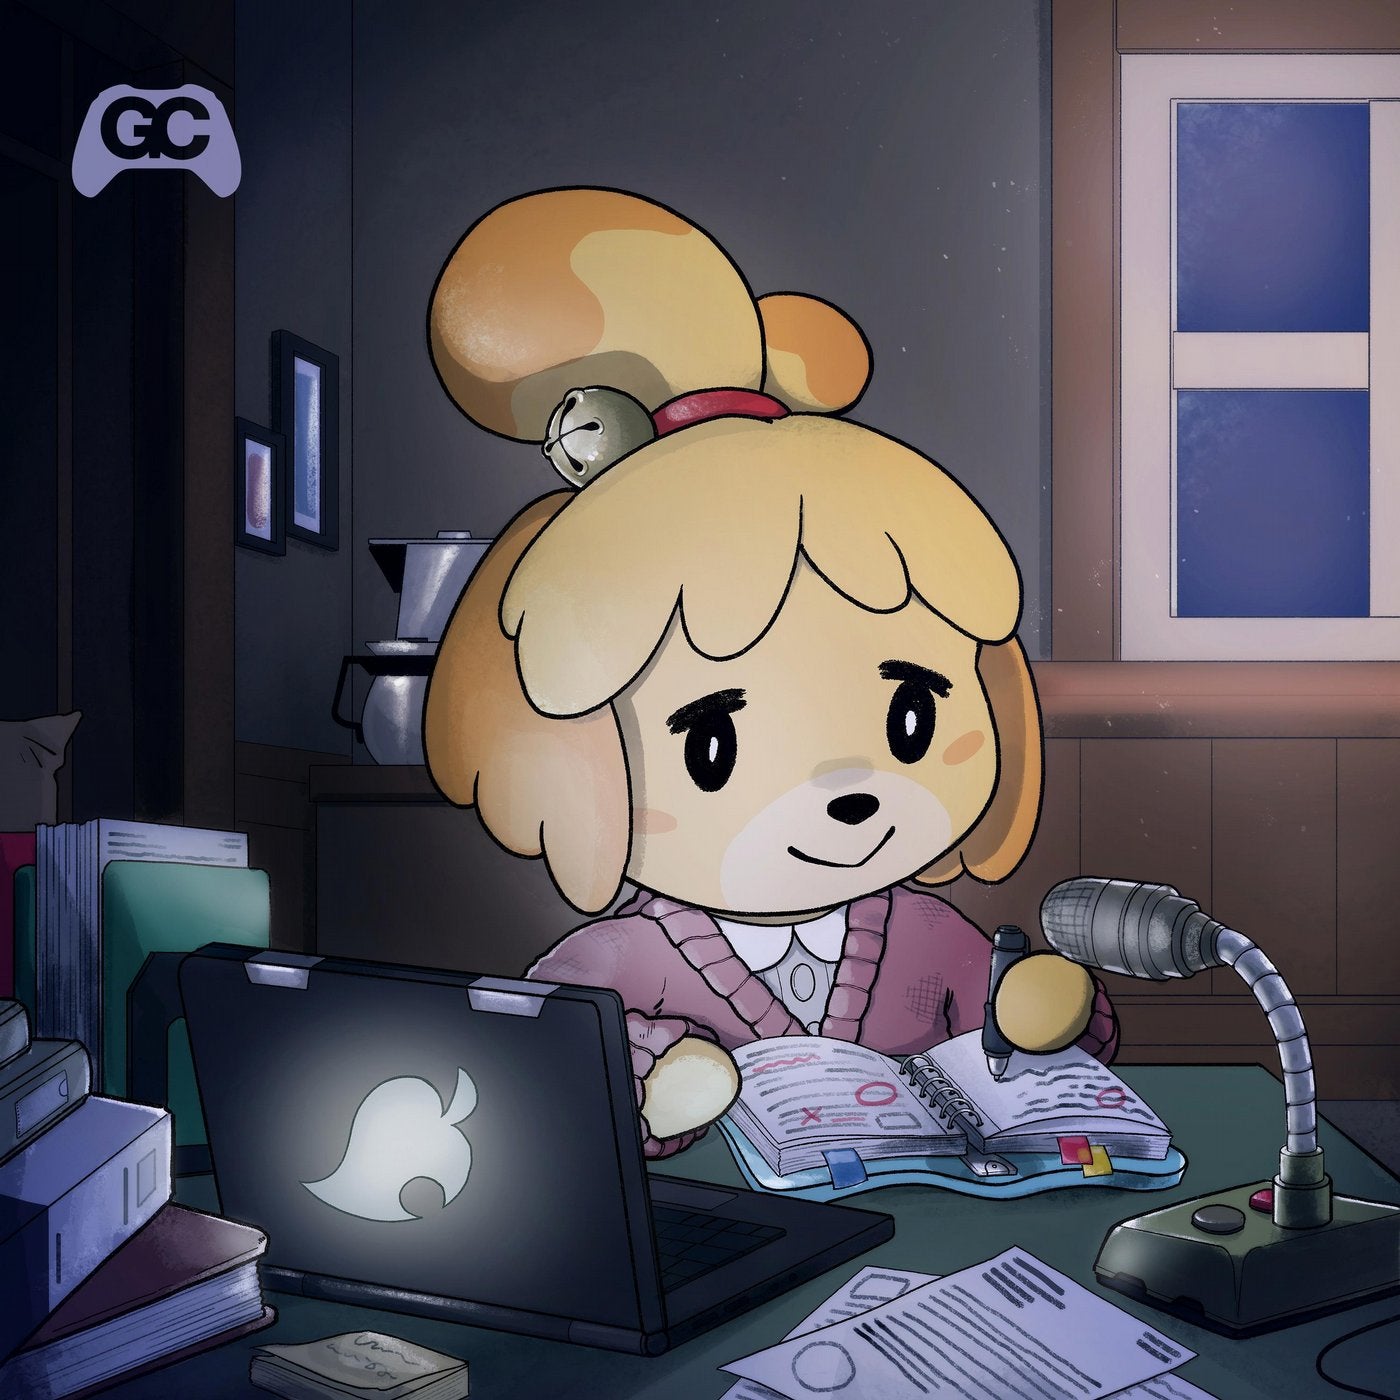 3 AM (From "Animal Crossing")